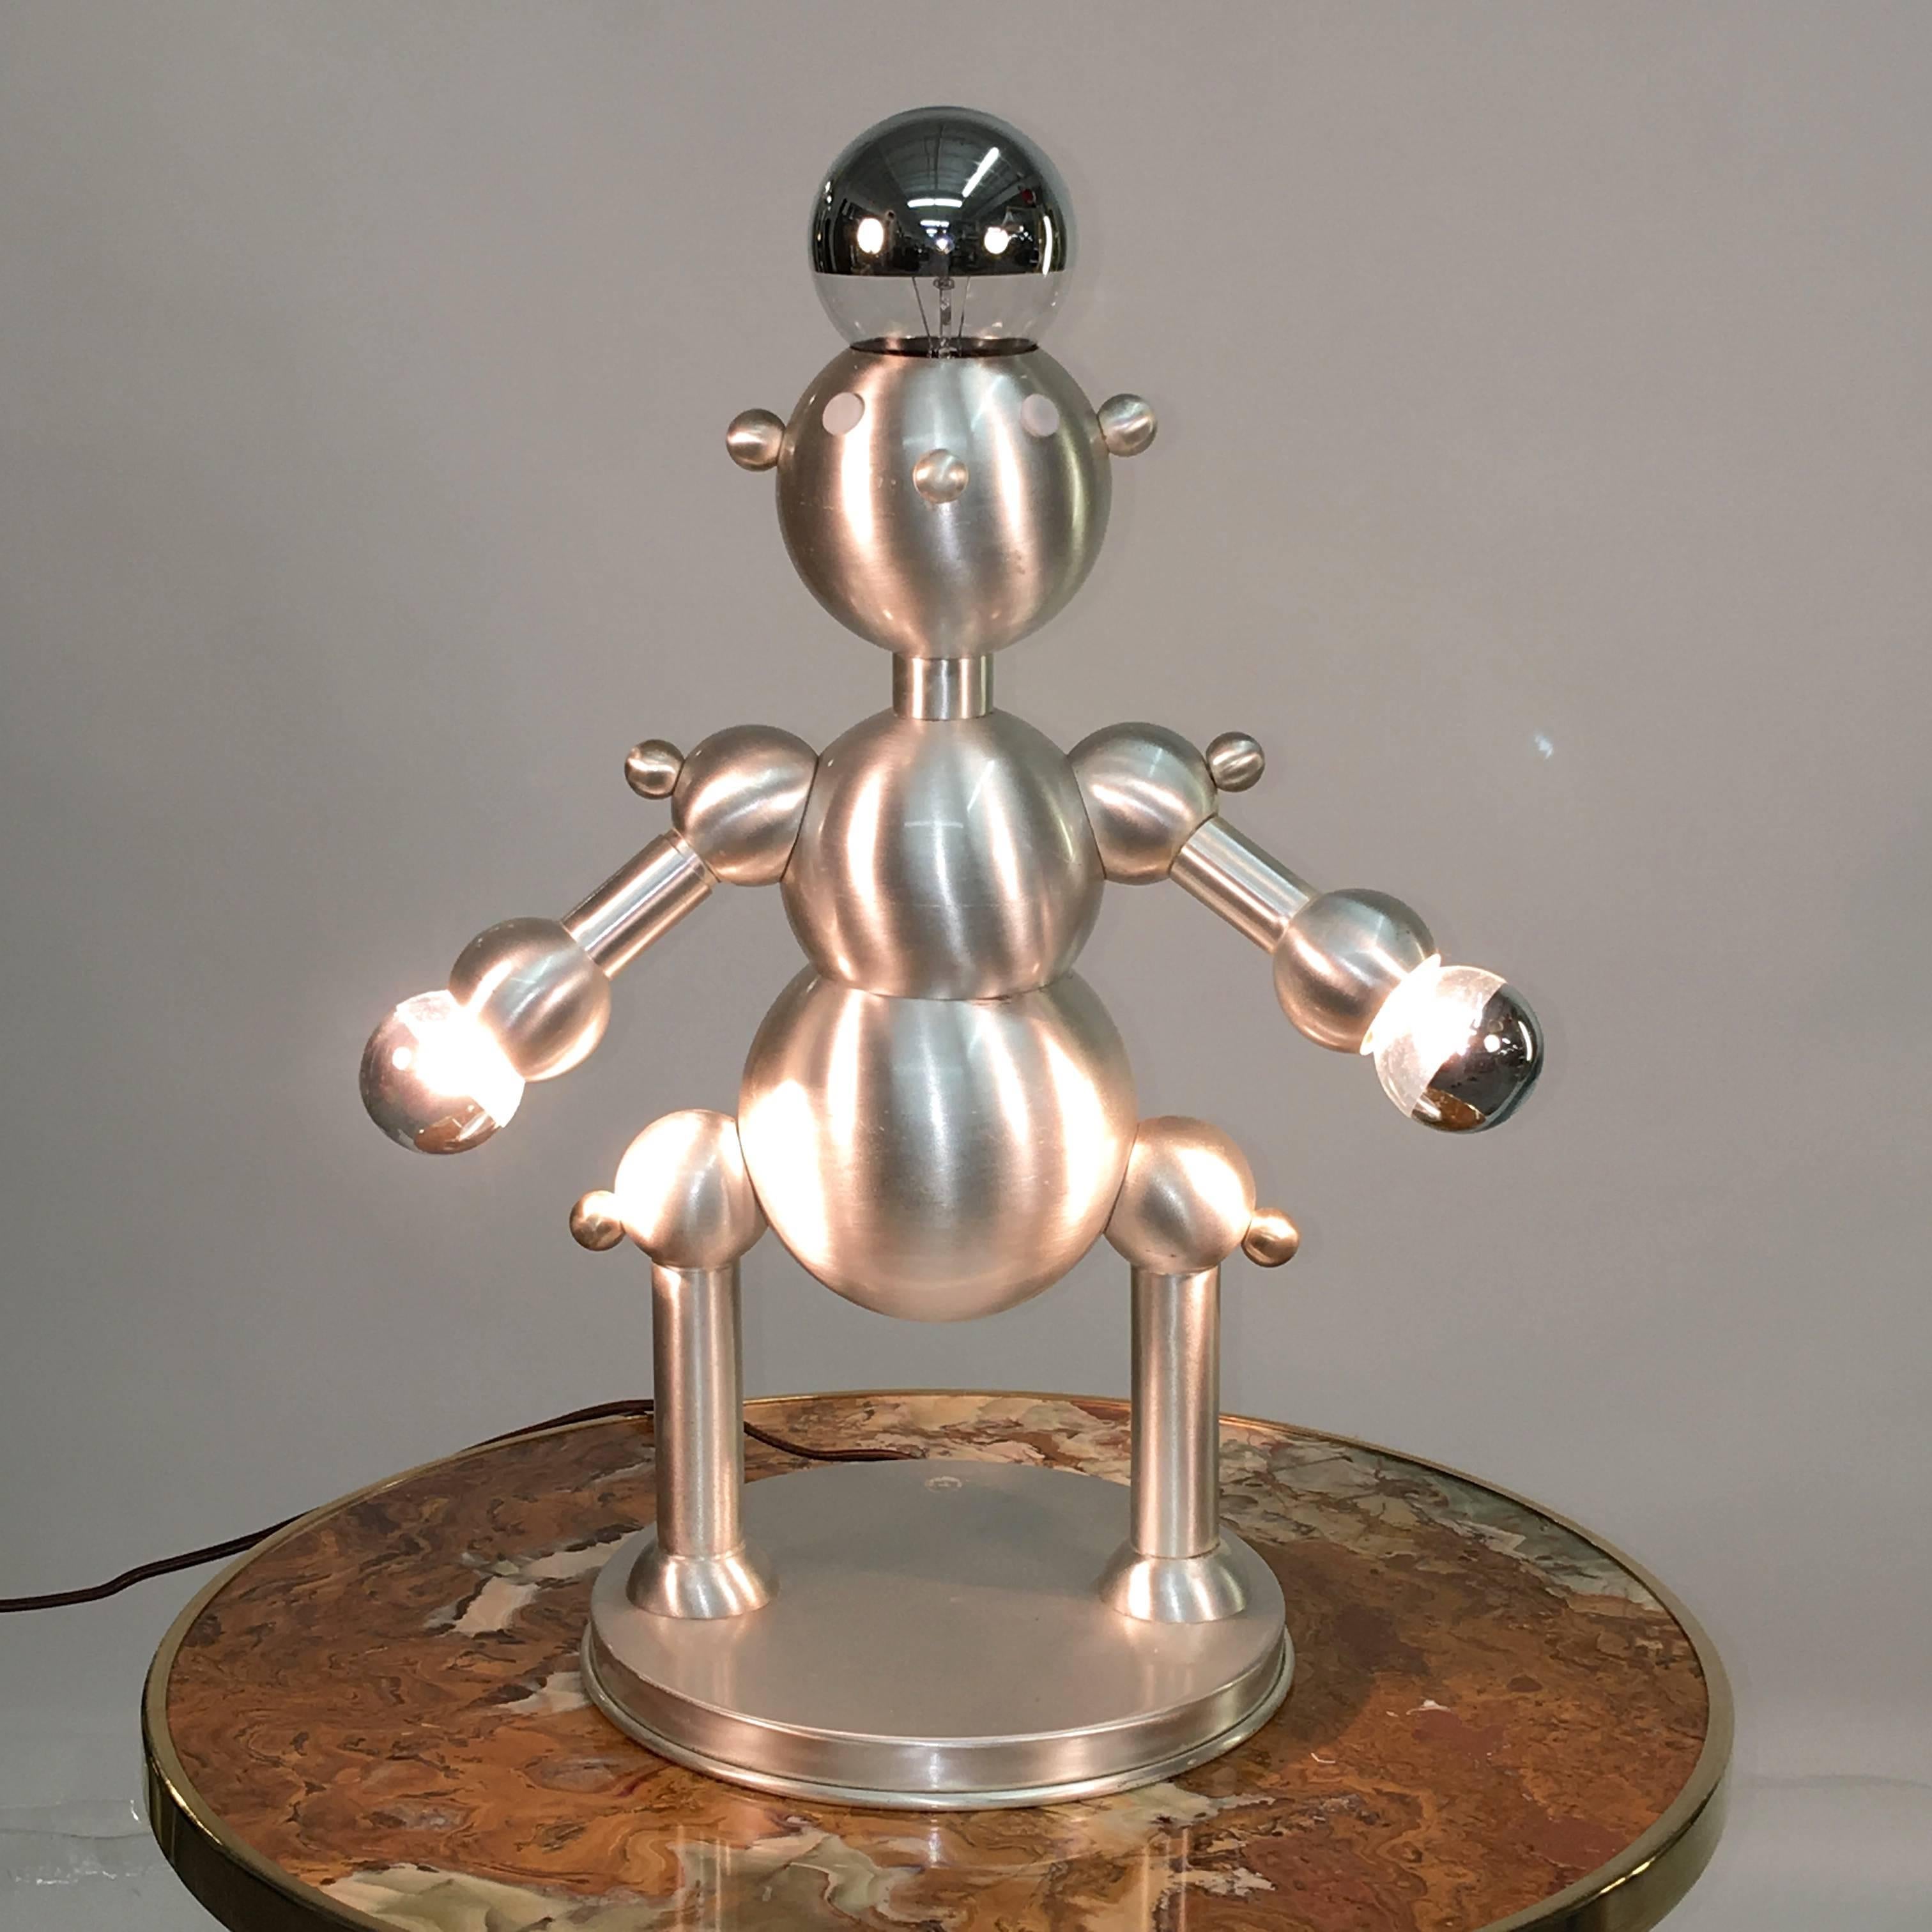 Copper Silver Plated Robot Lamp